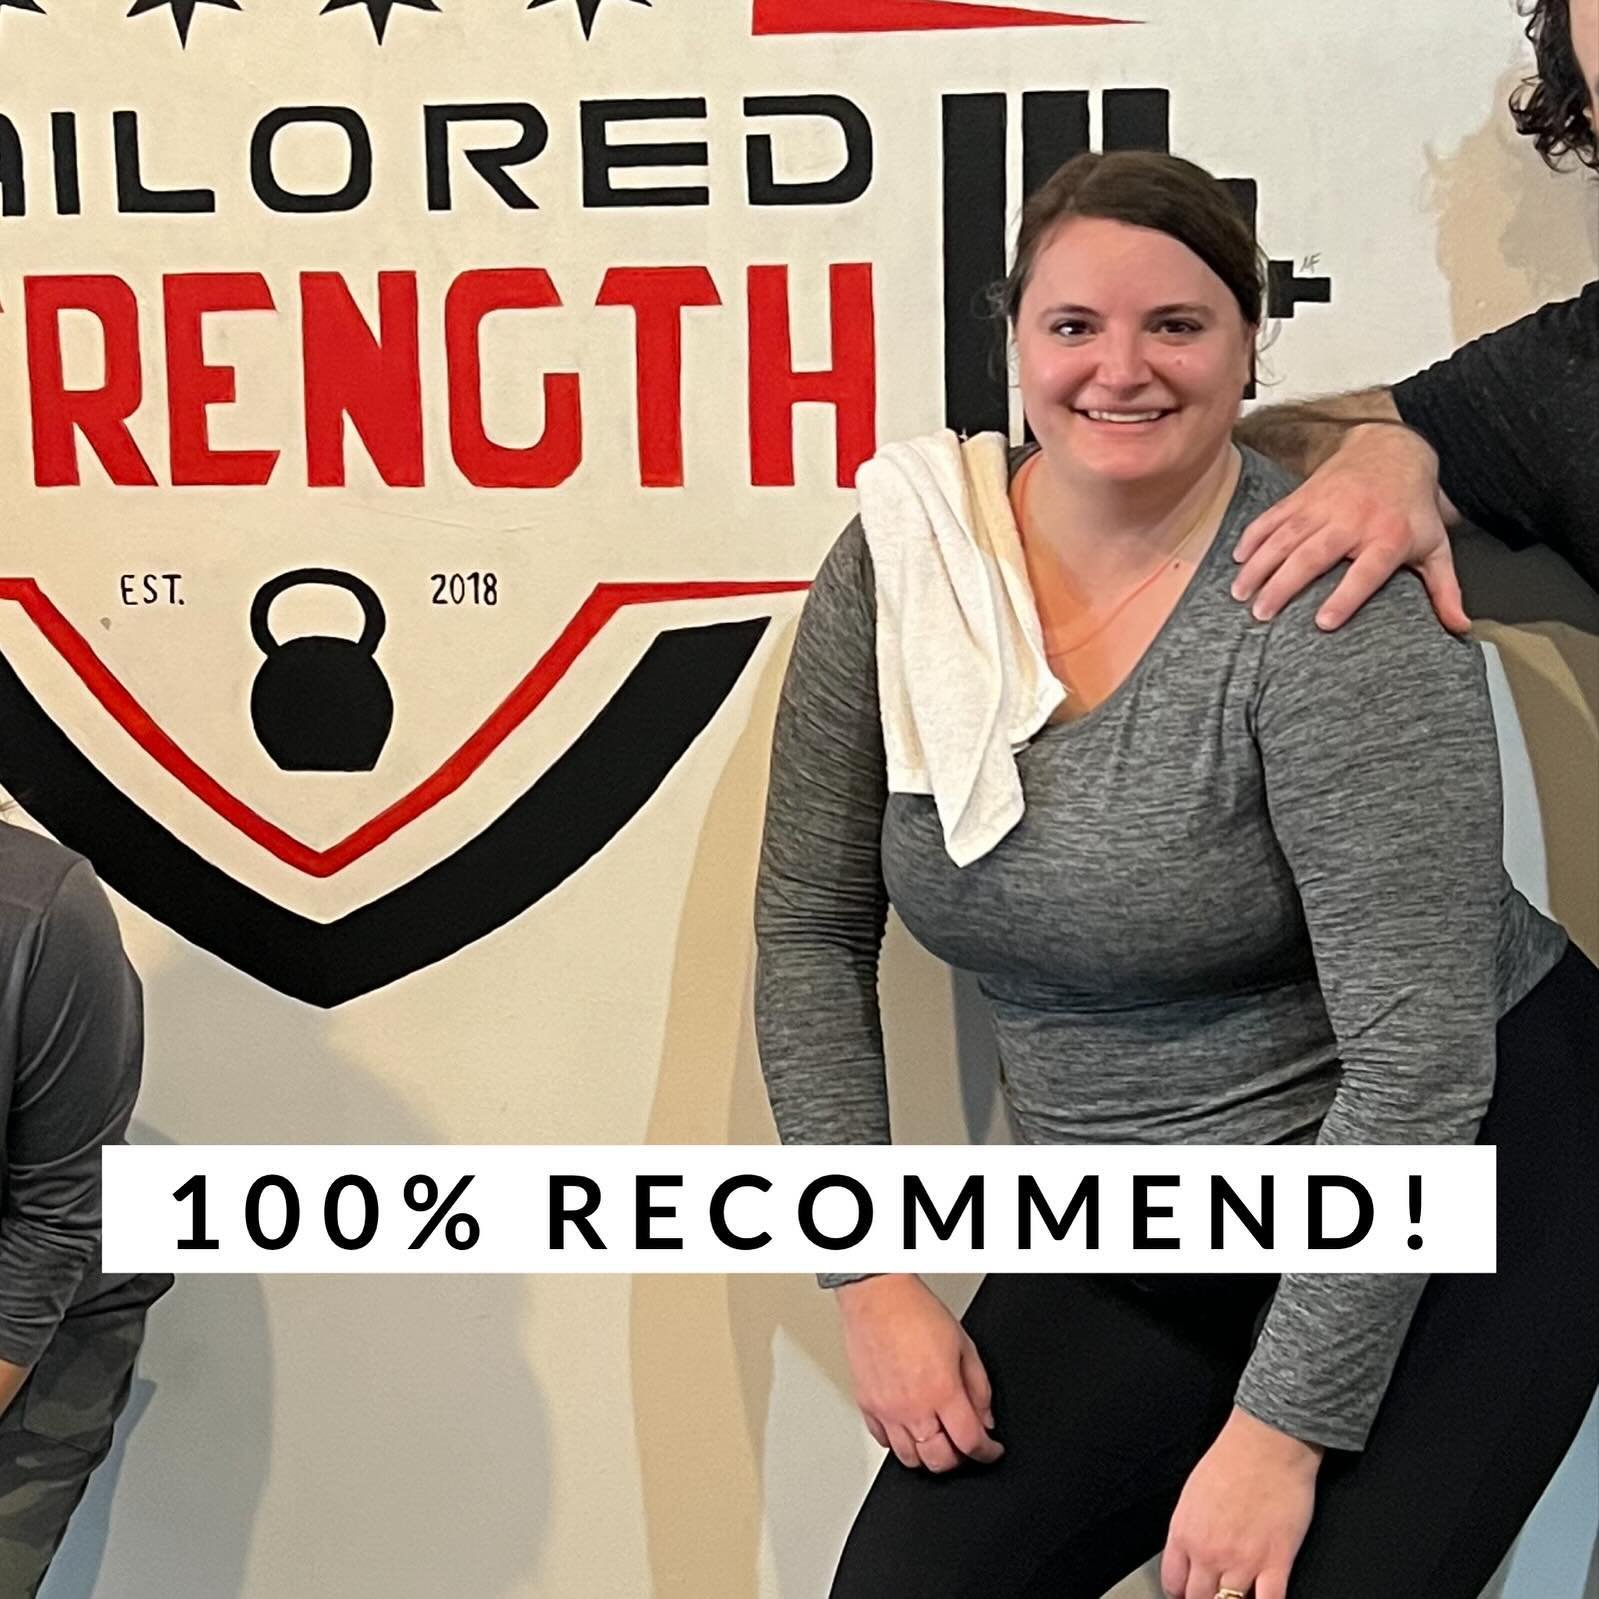 💯out of 💯 experience at Tailored Strength. Started going here with my husband to get stronger. We did our consultation with Ryan and he got us set up with a recommended plan, evaluated our form and made suggestions to help the exercises fit our spe